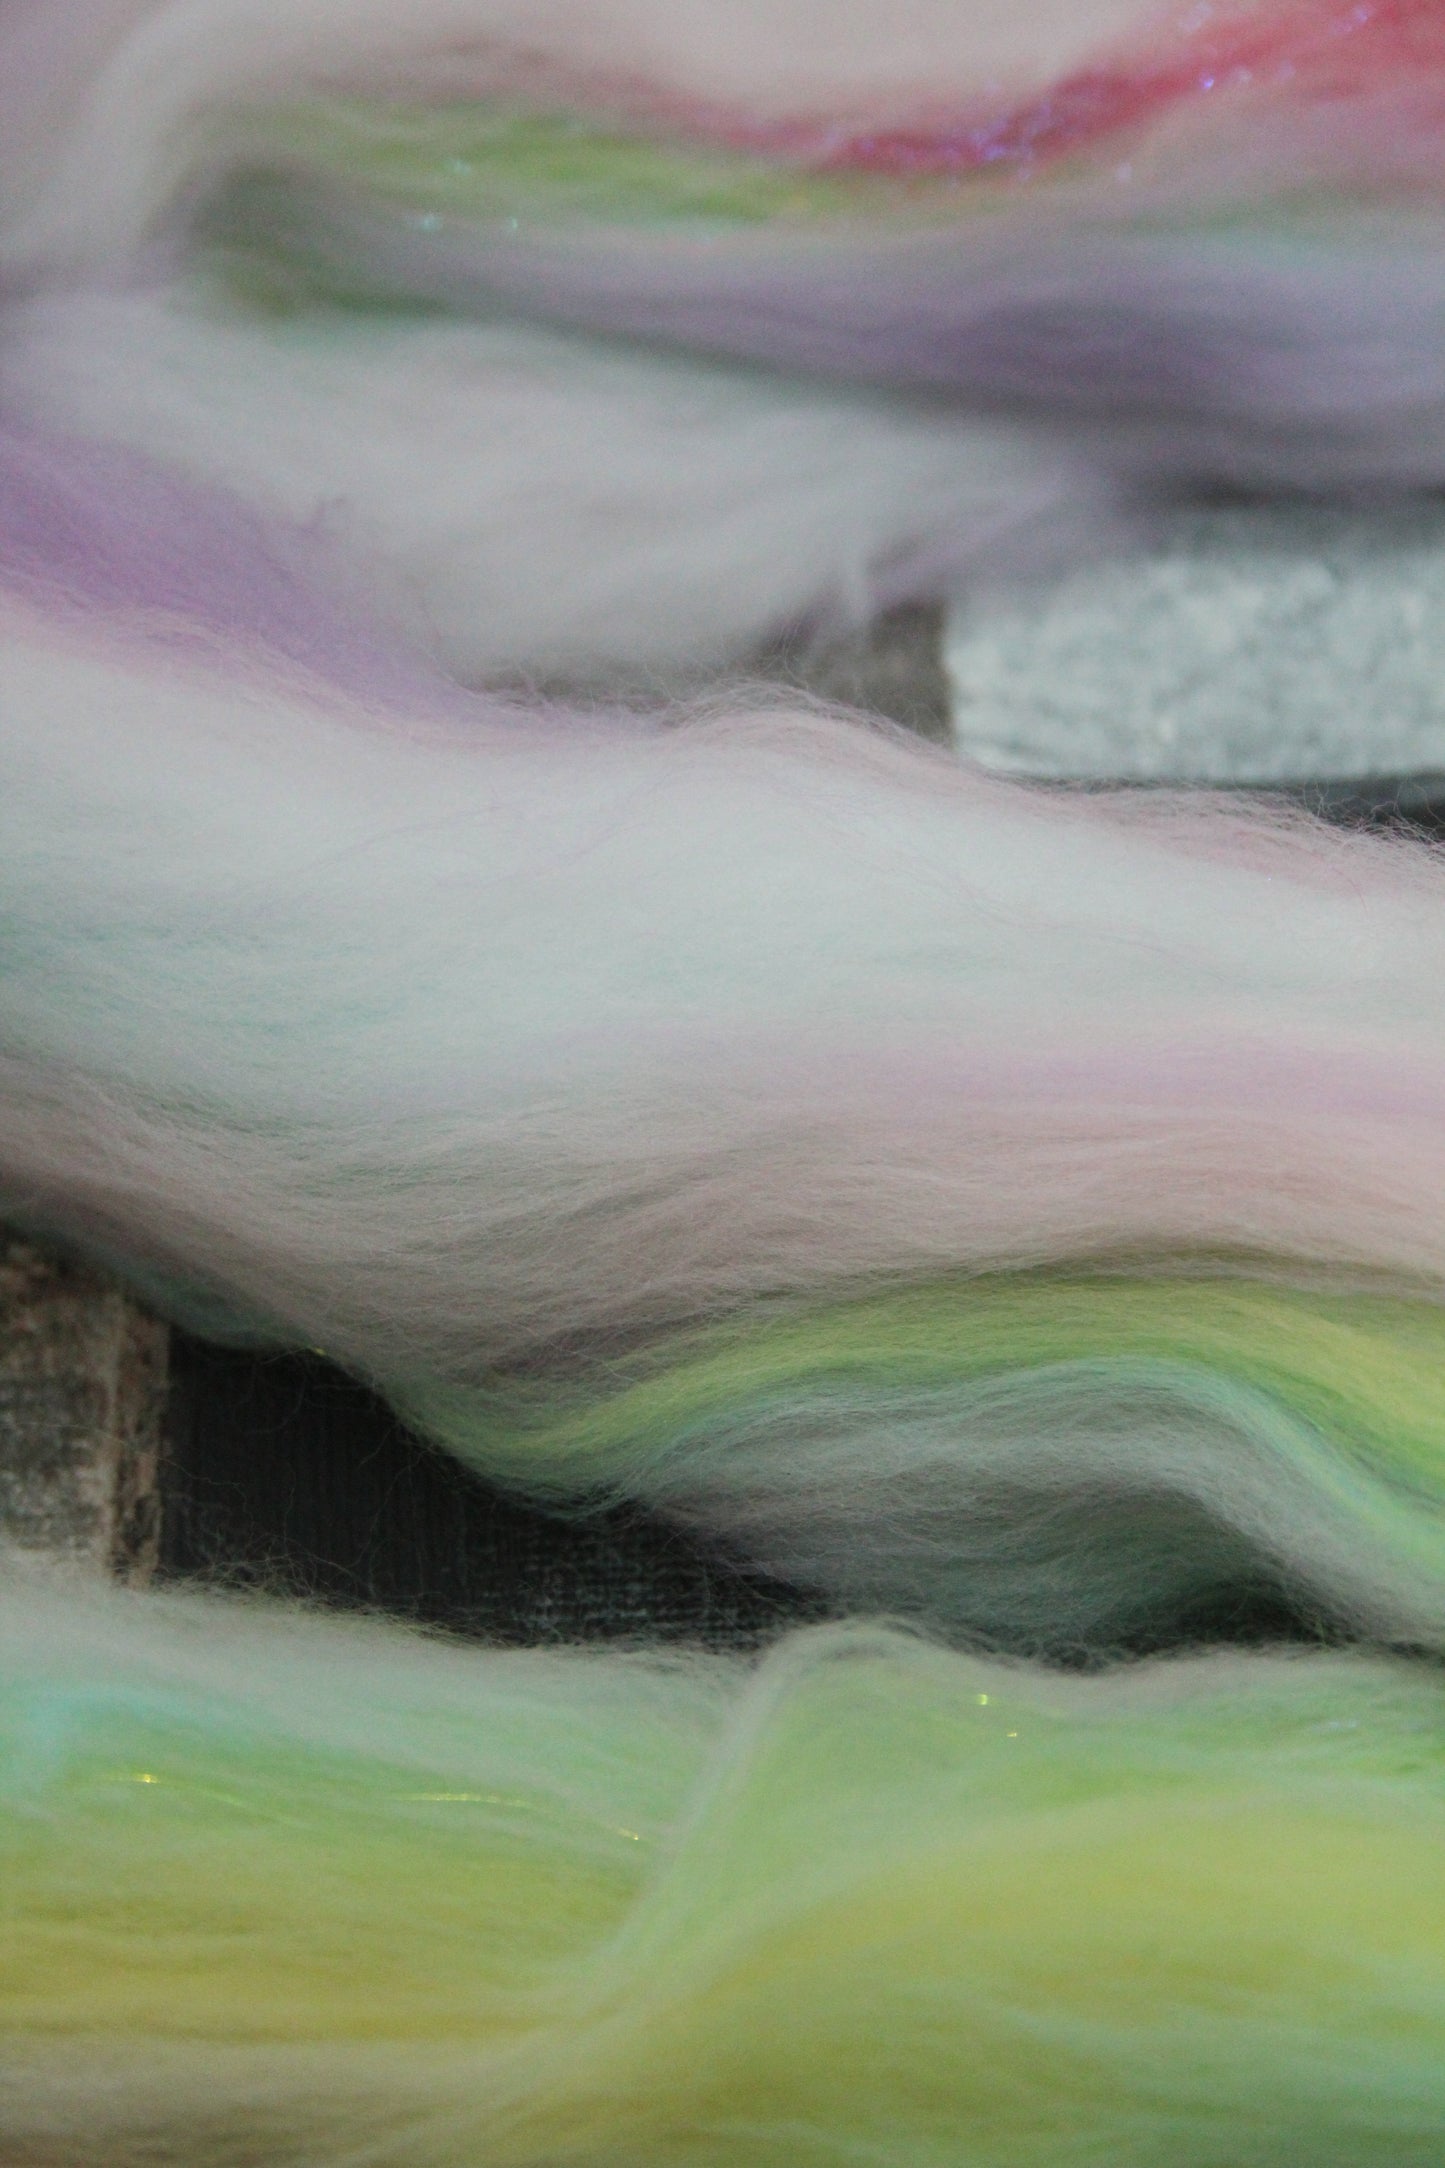 Wool Blend - Pink Turquoise Yellow Purple Green - 23 grams / 0.8 oz  - Fibre for felting, weaving or spinning